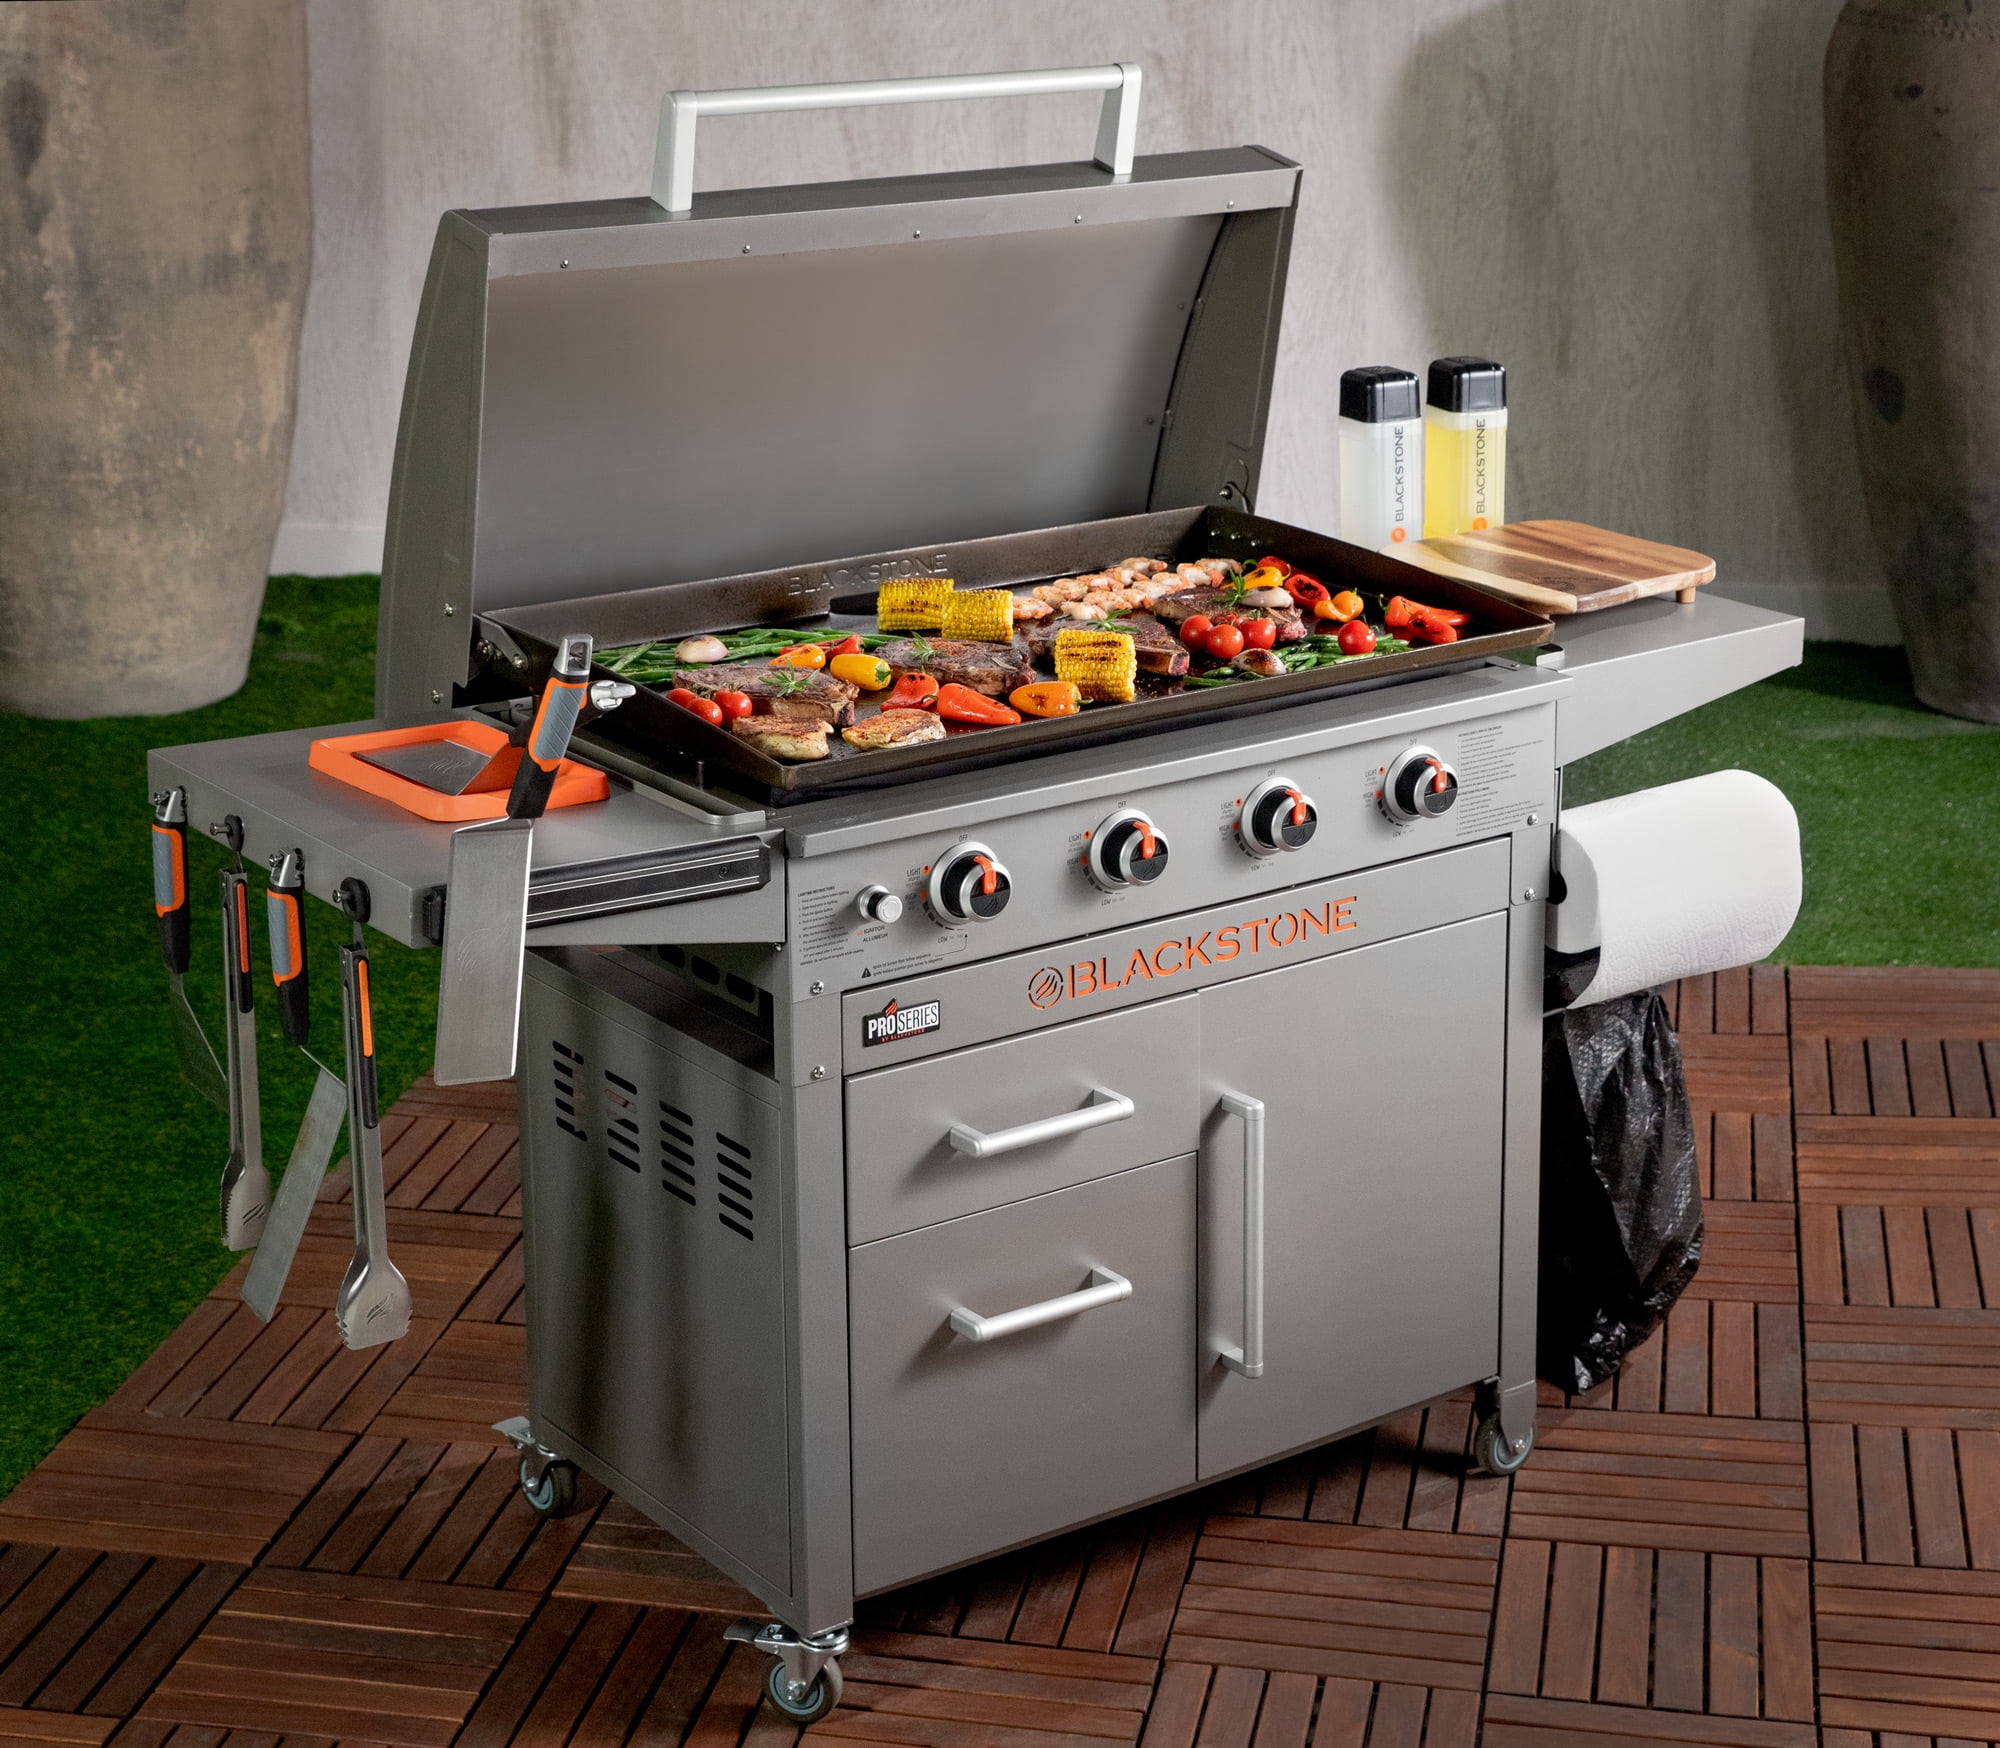  Blackstone 36 Inch Gas Griddle Cooking Station 4 Burner Flat  Top Gas Grill Propane Fuelled Restaurant Grade Professional 36” Outdoor  Griddle Station with Side Shelf (1554) : Clothing, Shoes & Jewelry